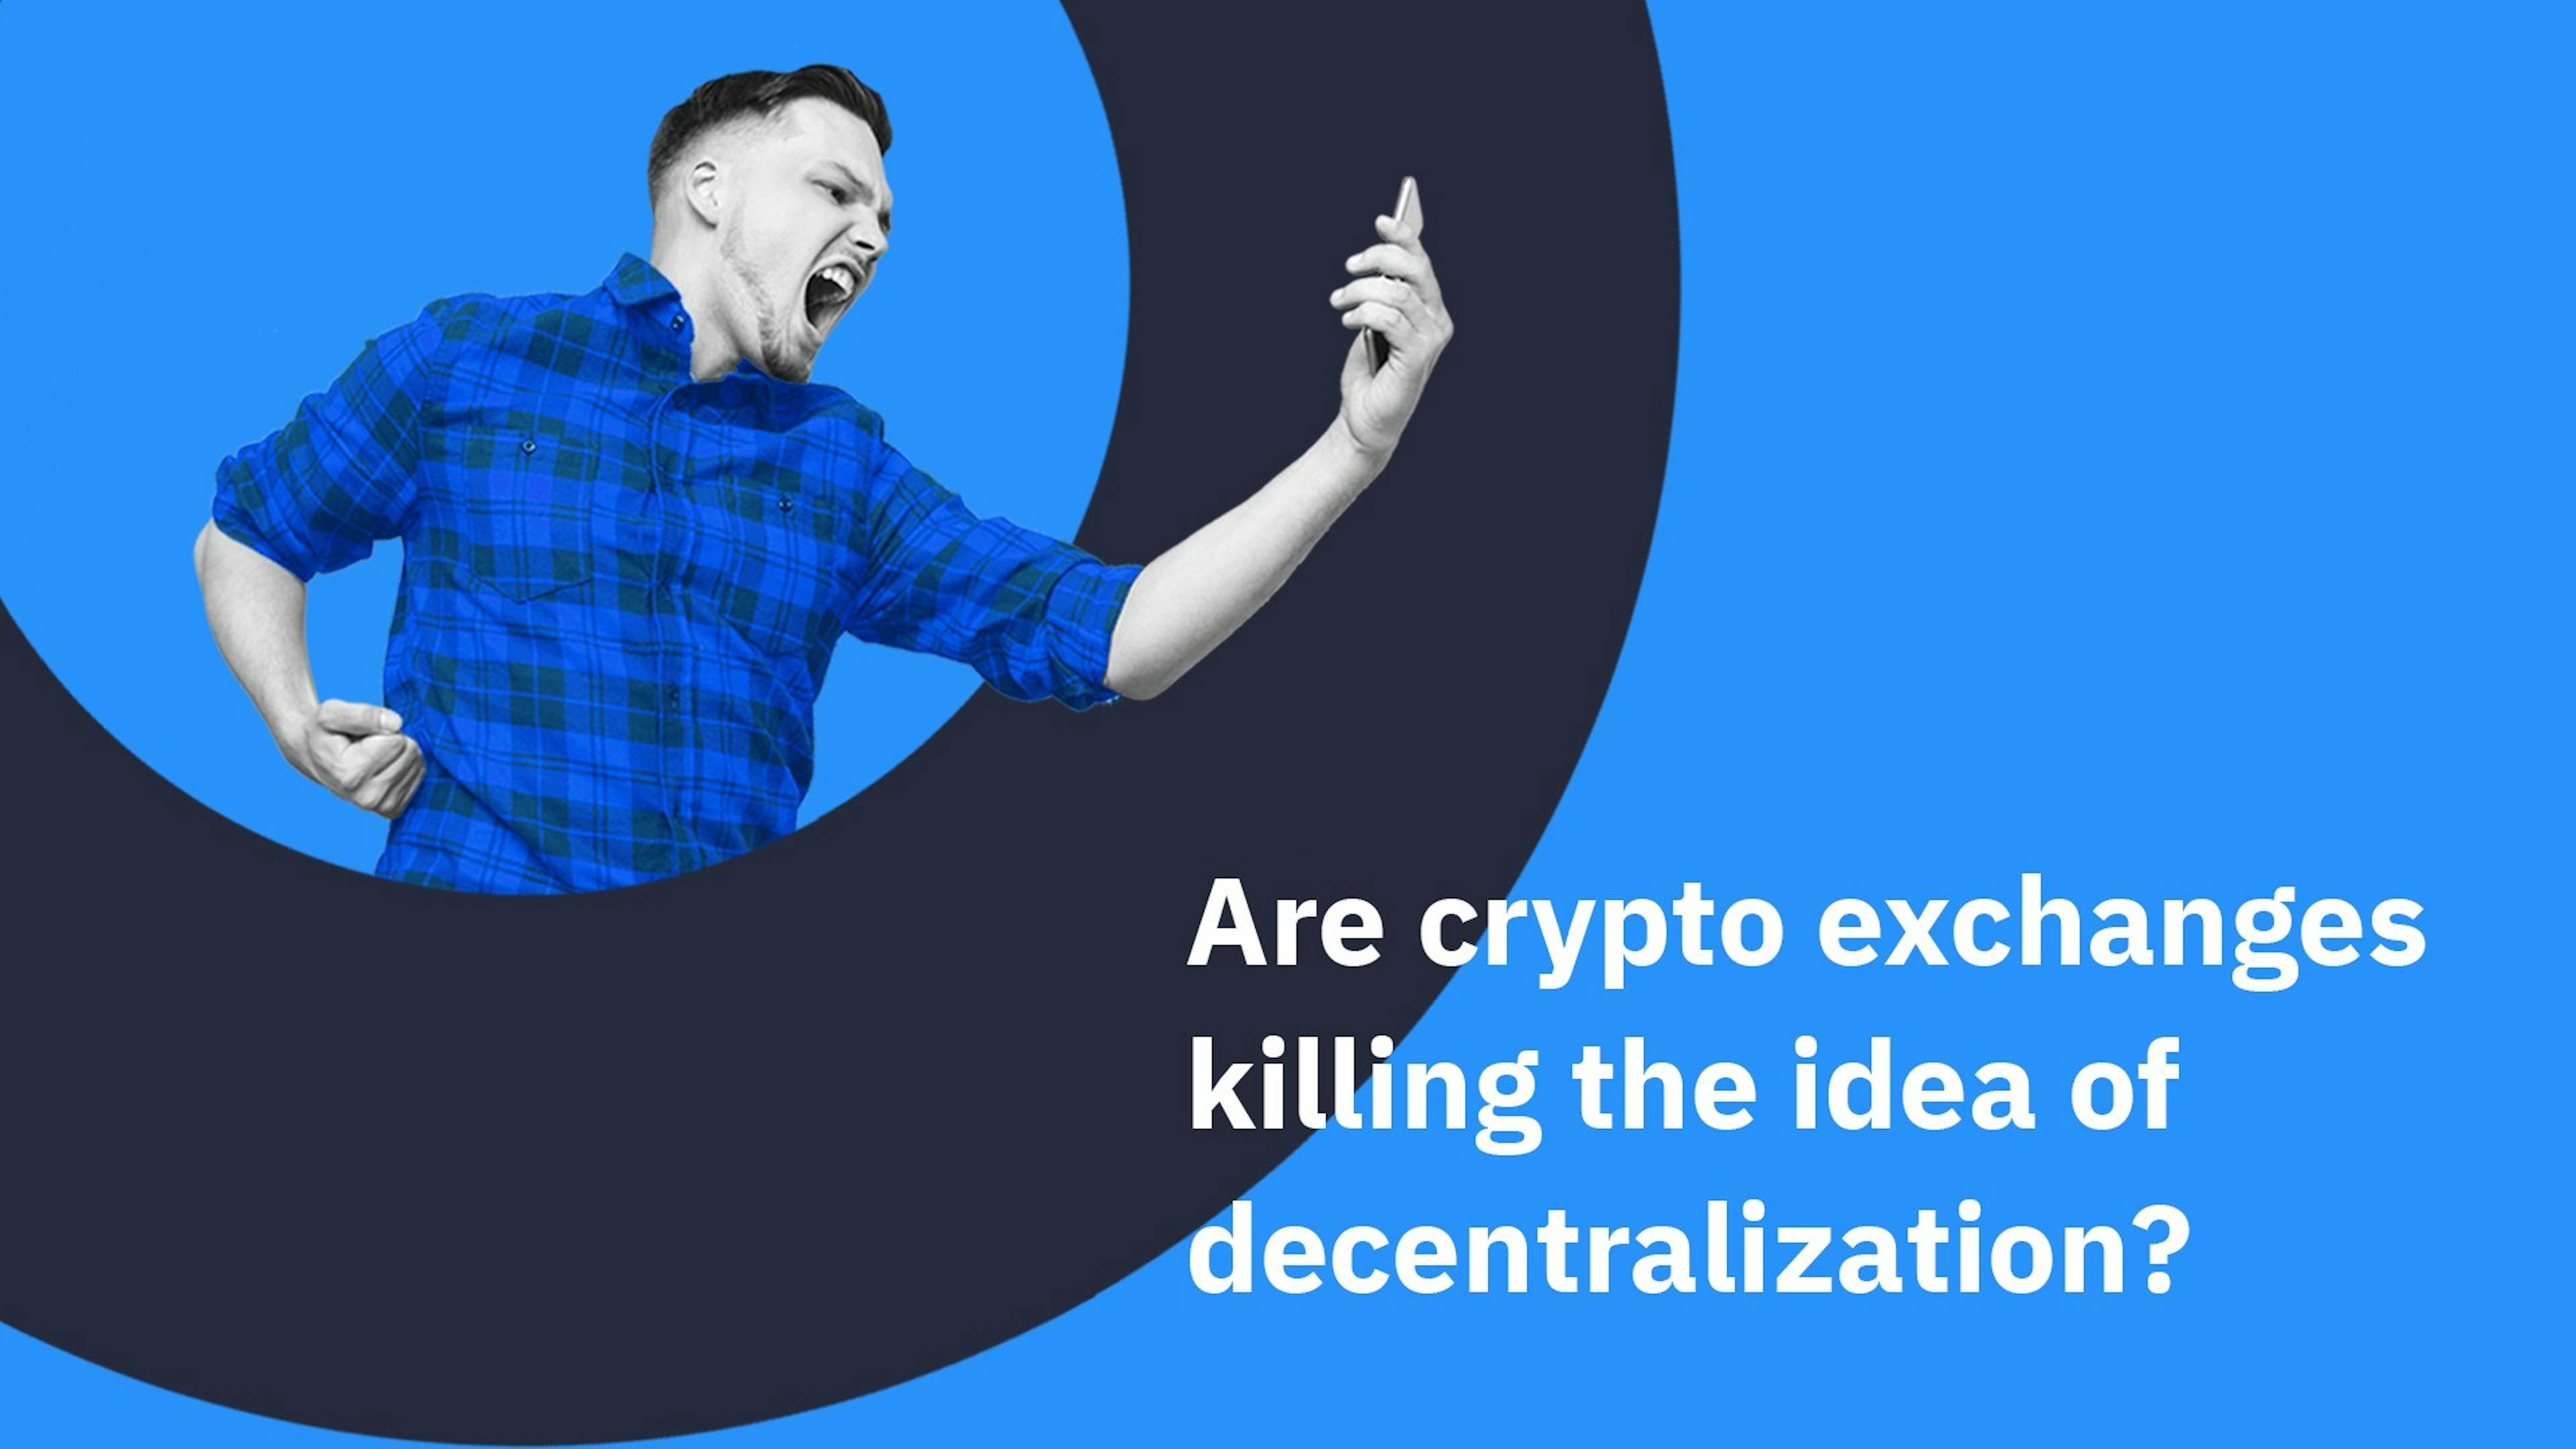 featured image - The main idea behind digital assets is decentralization but major players are centralized.